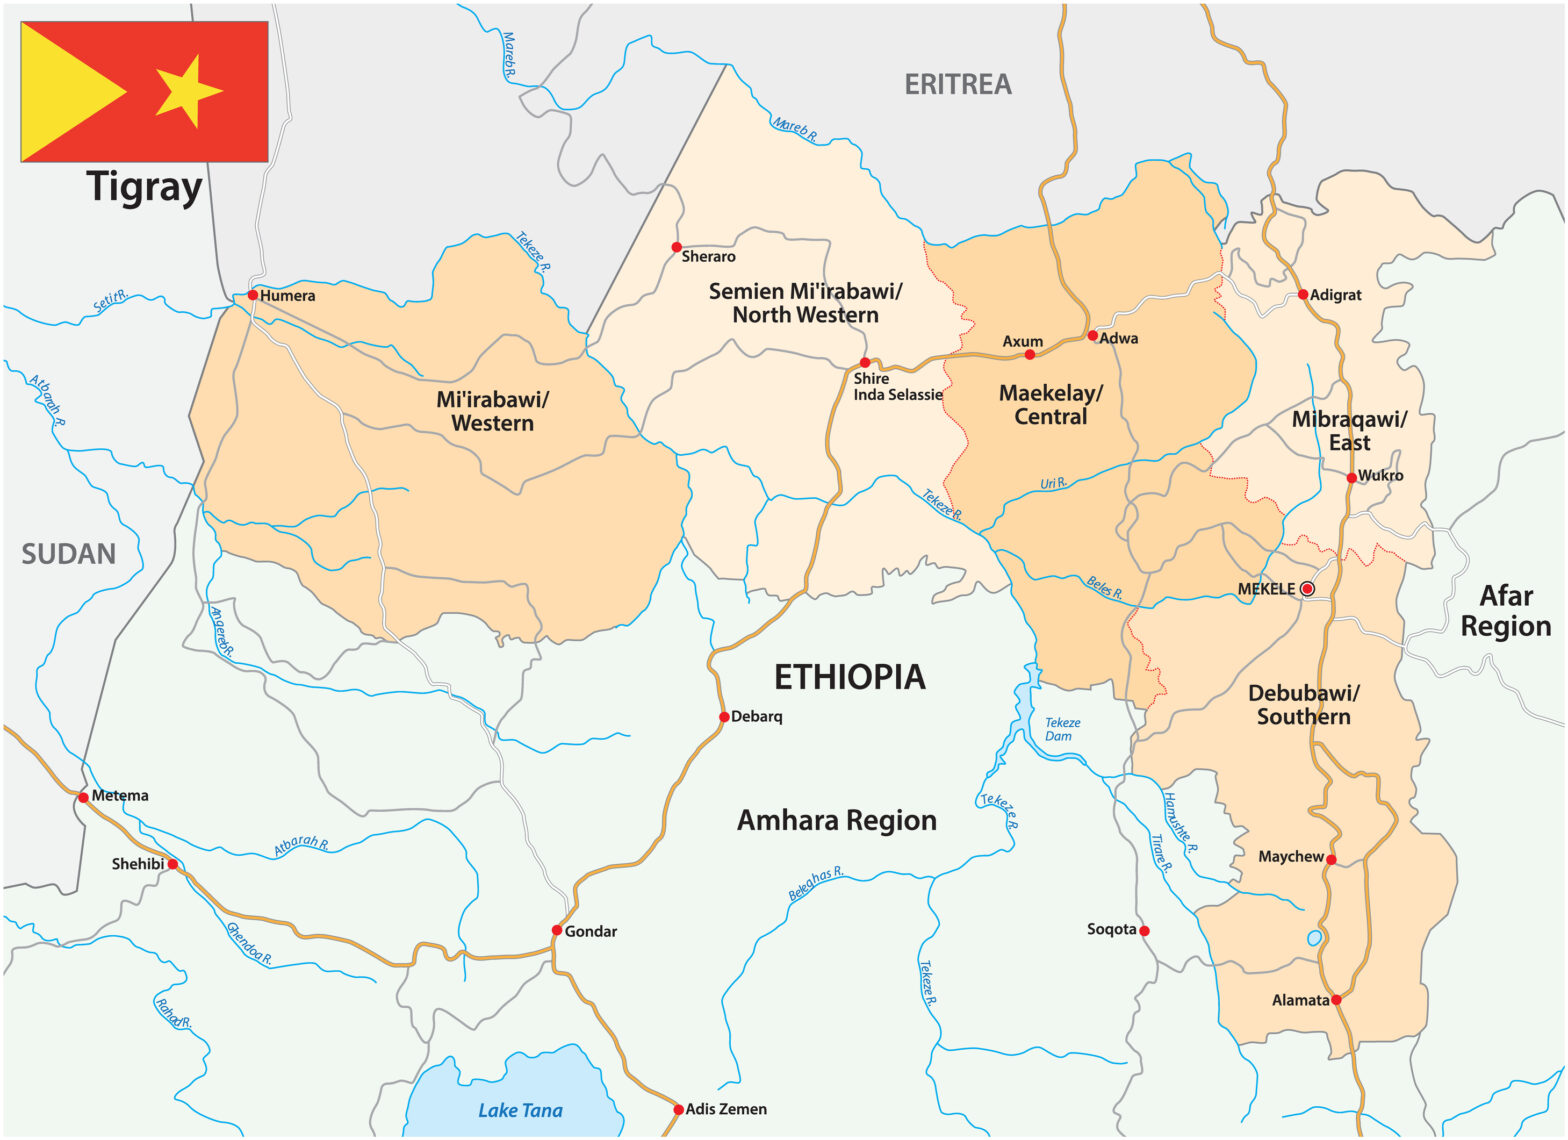 USCRI Statement Calling for an Independent United Nations Investigation into the Refugees from the Tigray Region of Ethiopia who are Missing